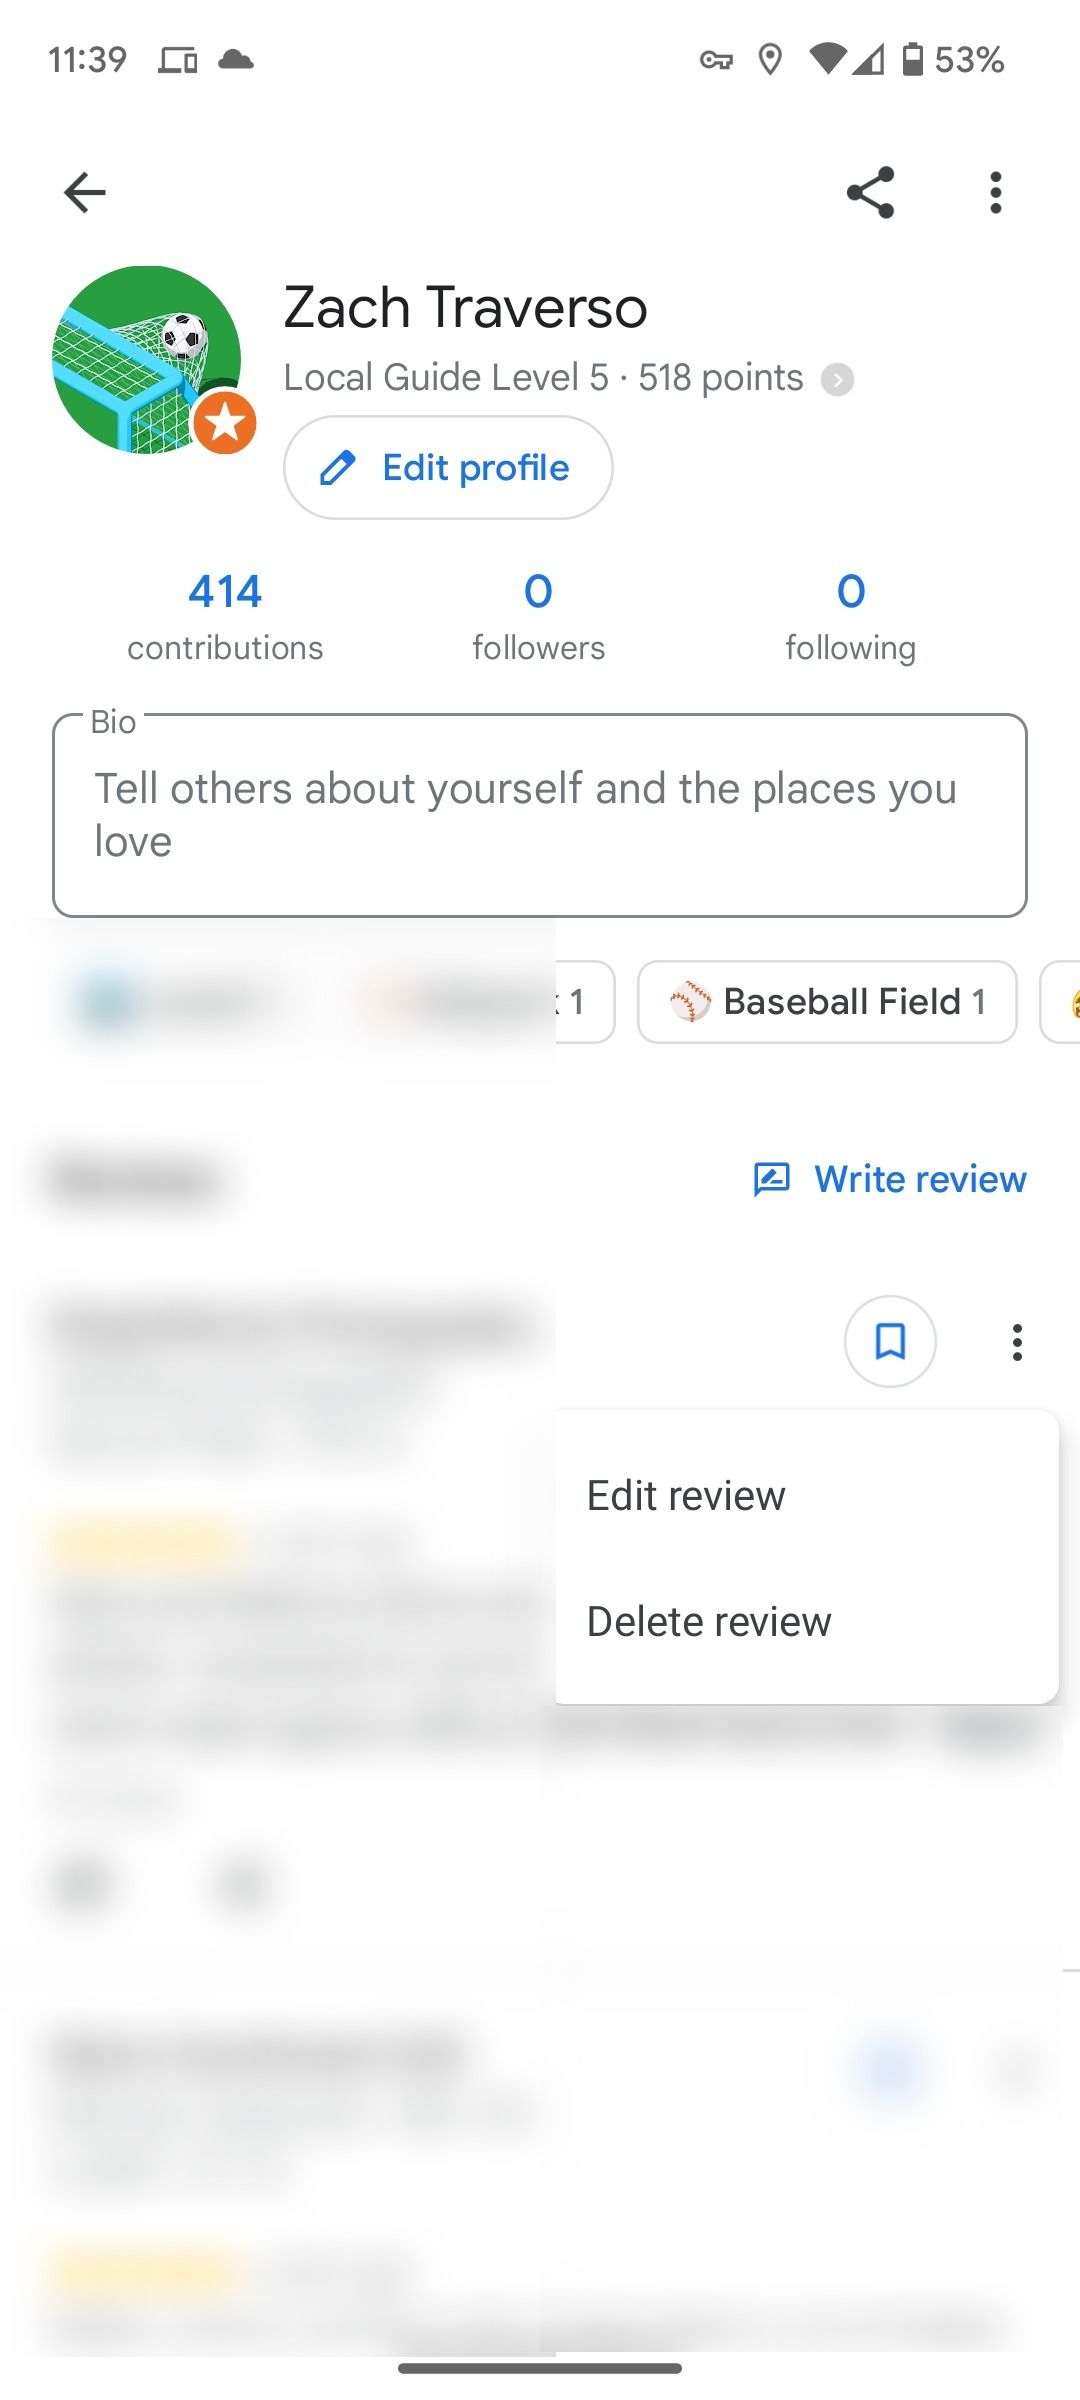 The Google Maps app personal profile section